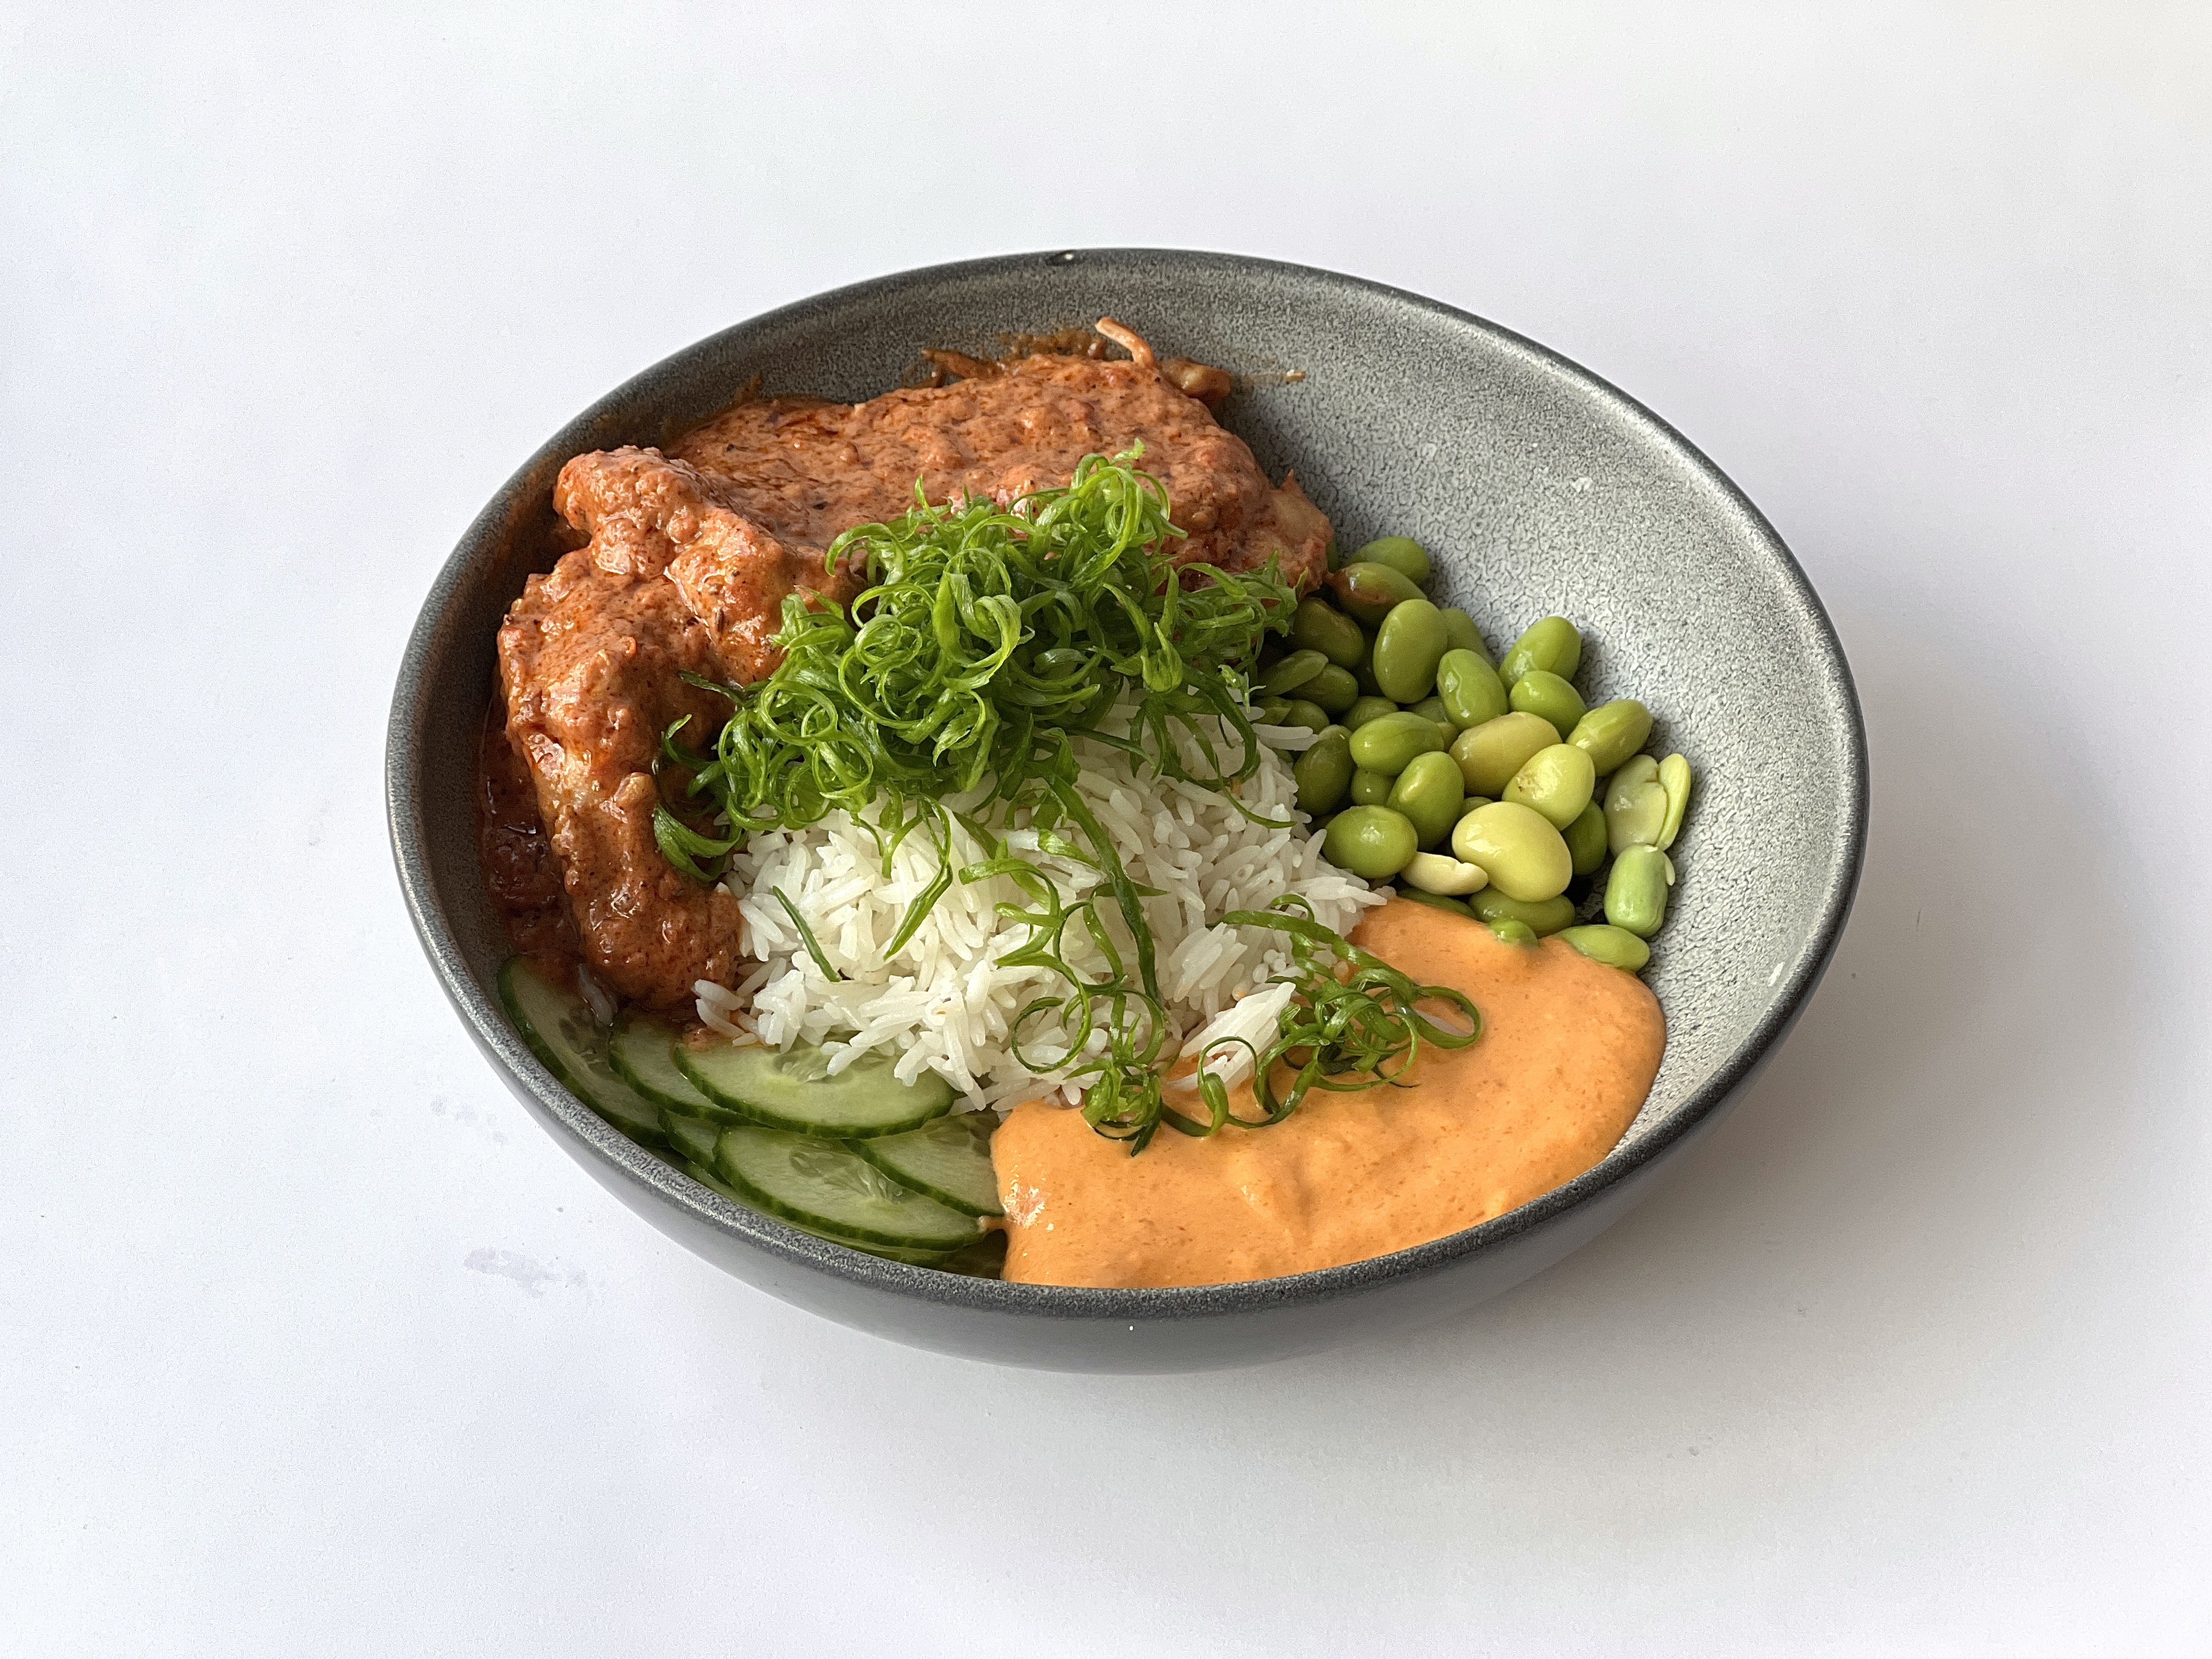 Fried chicken with tikka masala sauce, ginger<br>cucumber, edamame,baked pepper pesto, tomatoes<br><br>